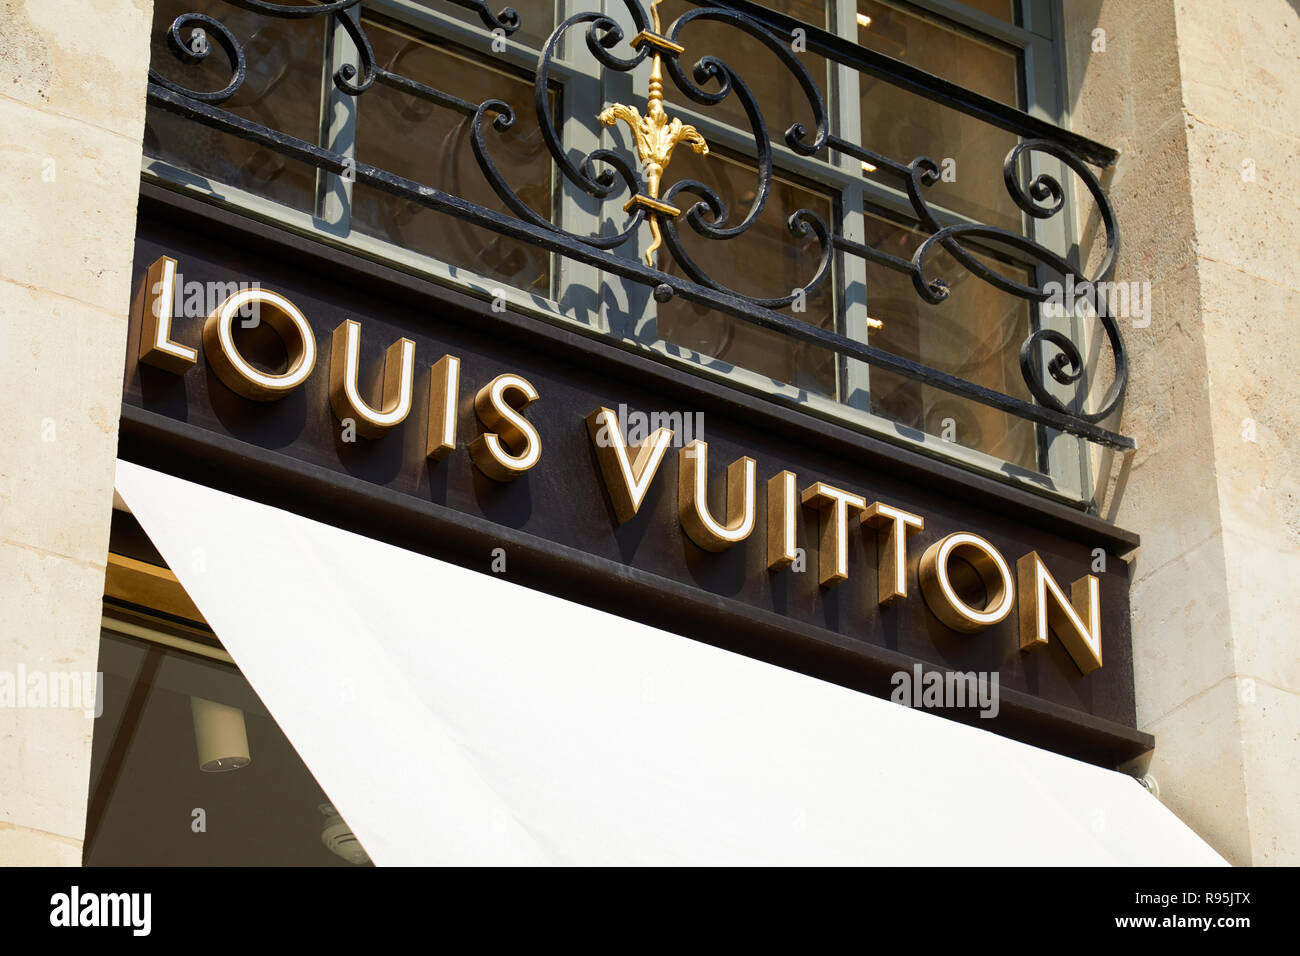 An art installation in the building of the fashion store Louis Vuitton  Maison Vendome, Paris, France Stock Photo - Alamy